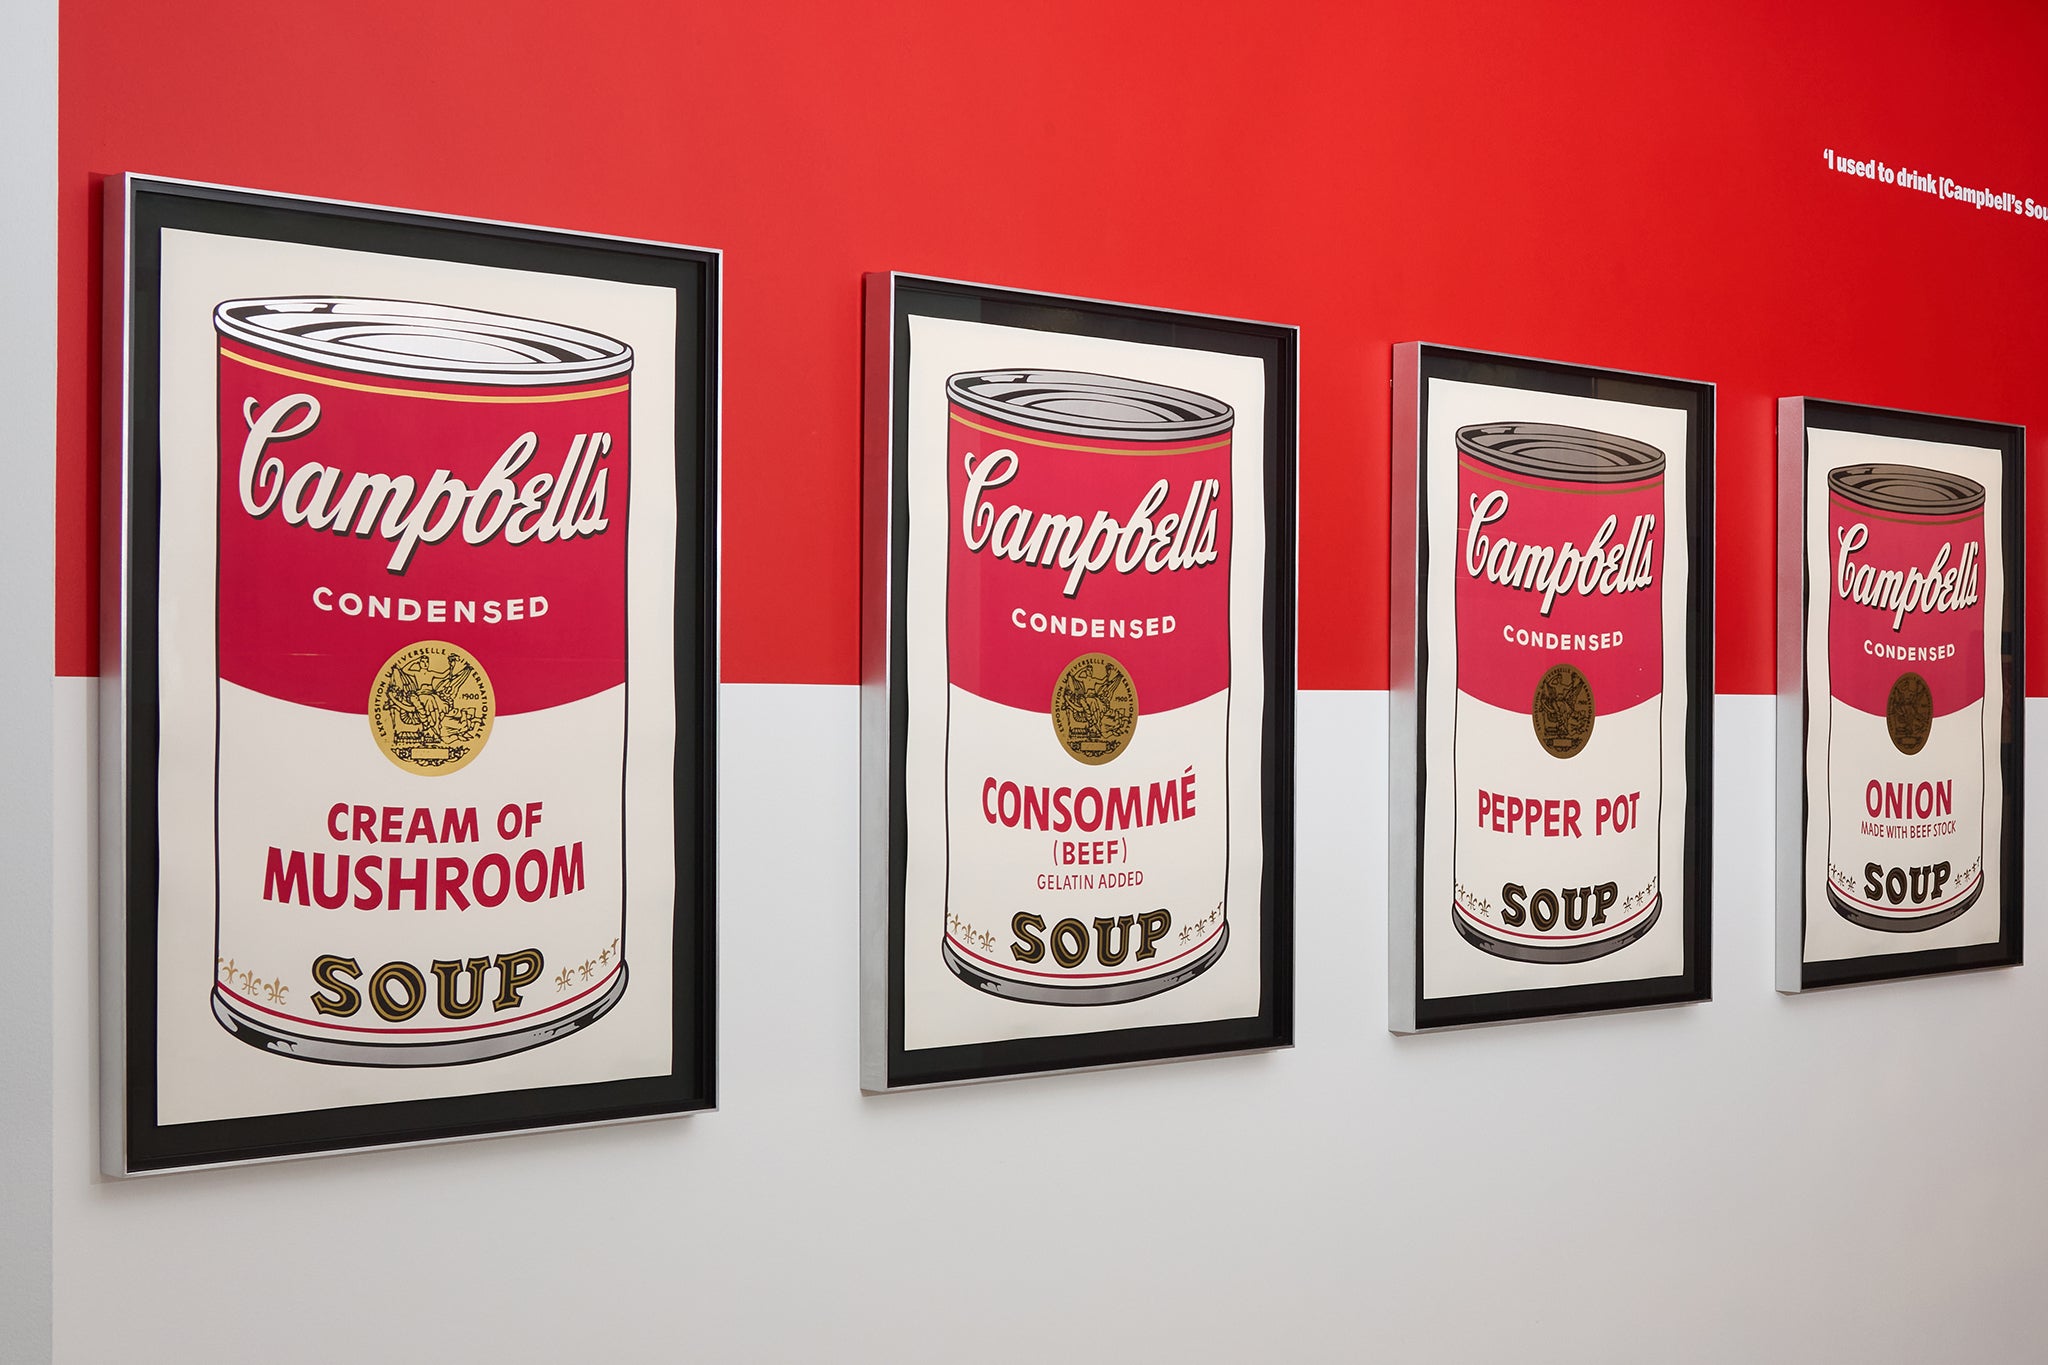 Warhol’s soup paintings take over the smaller of the two Mayfair art spaces dedicated to the exhibition